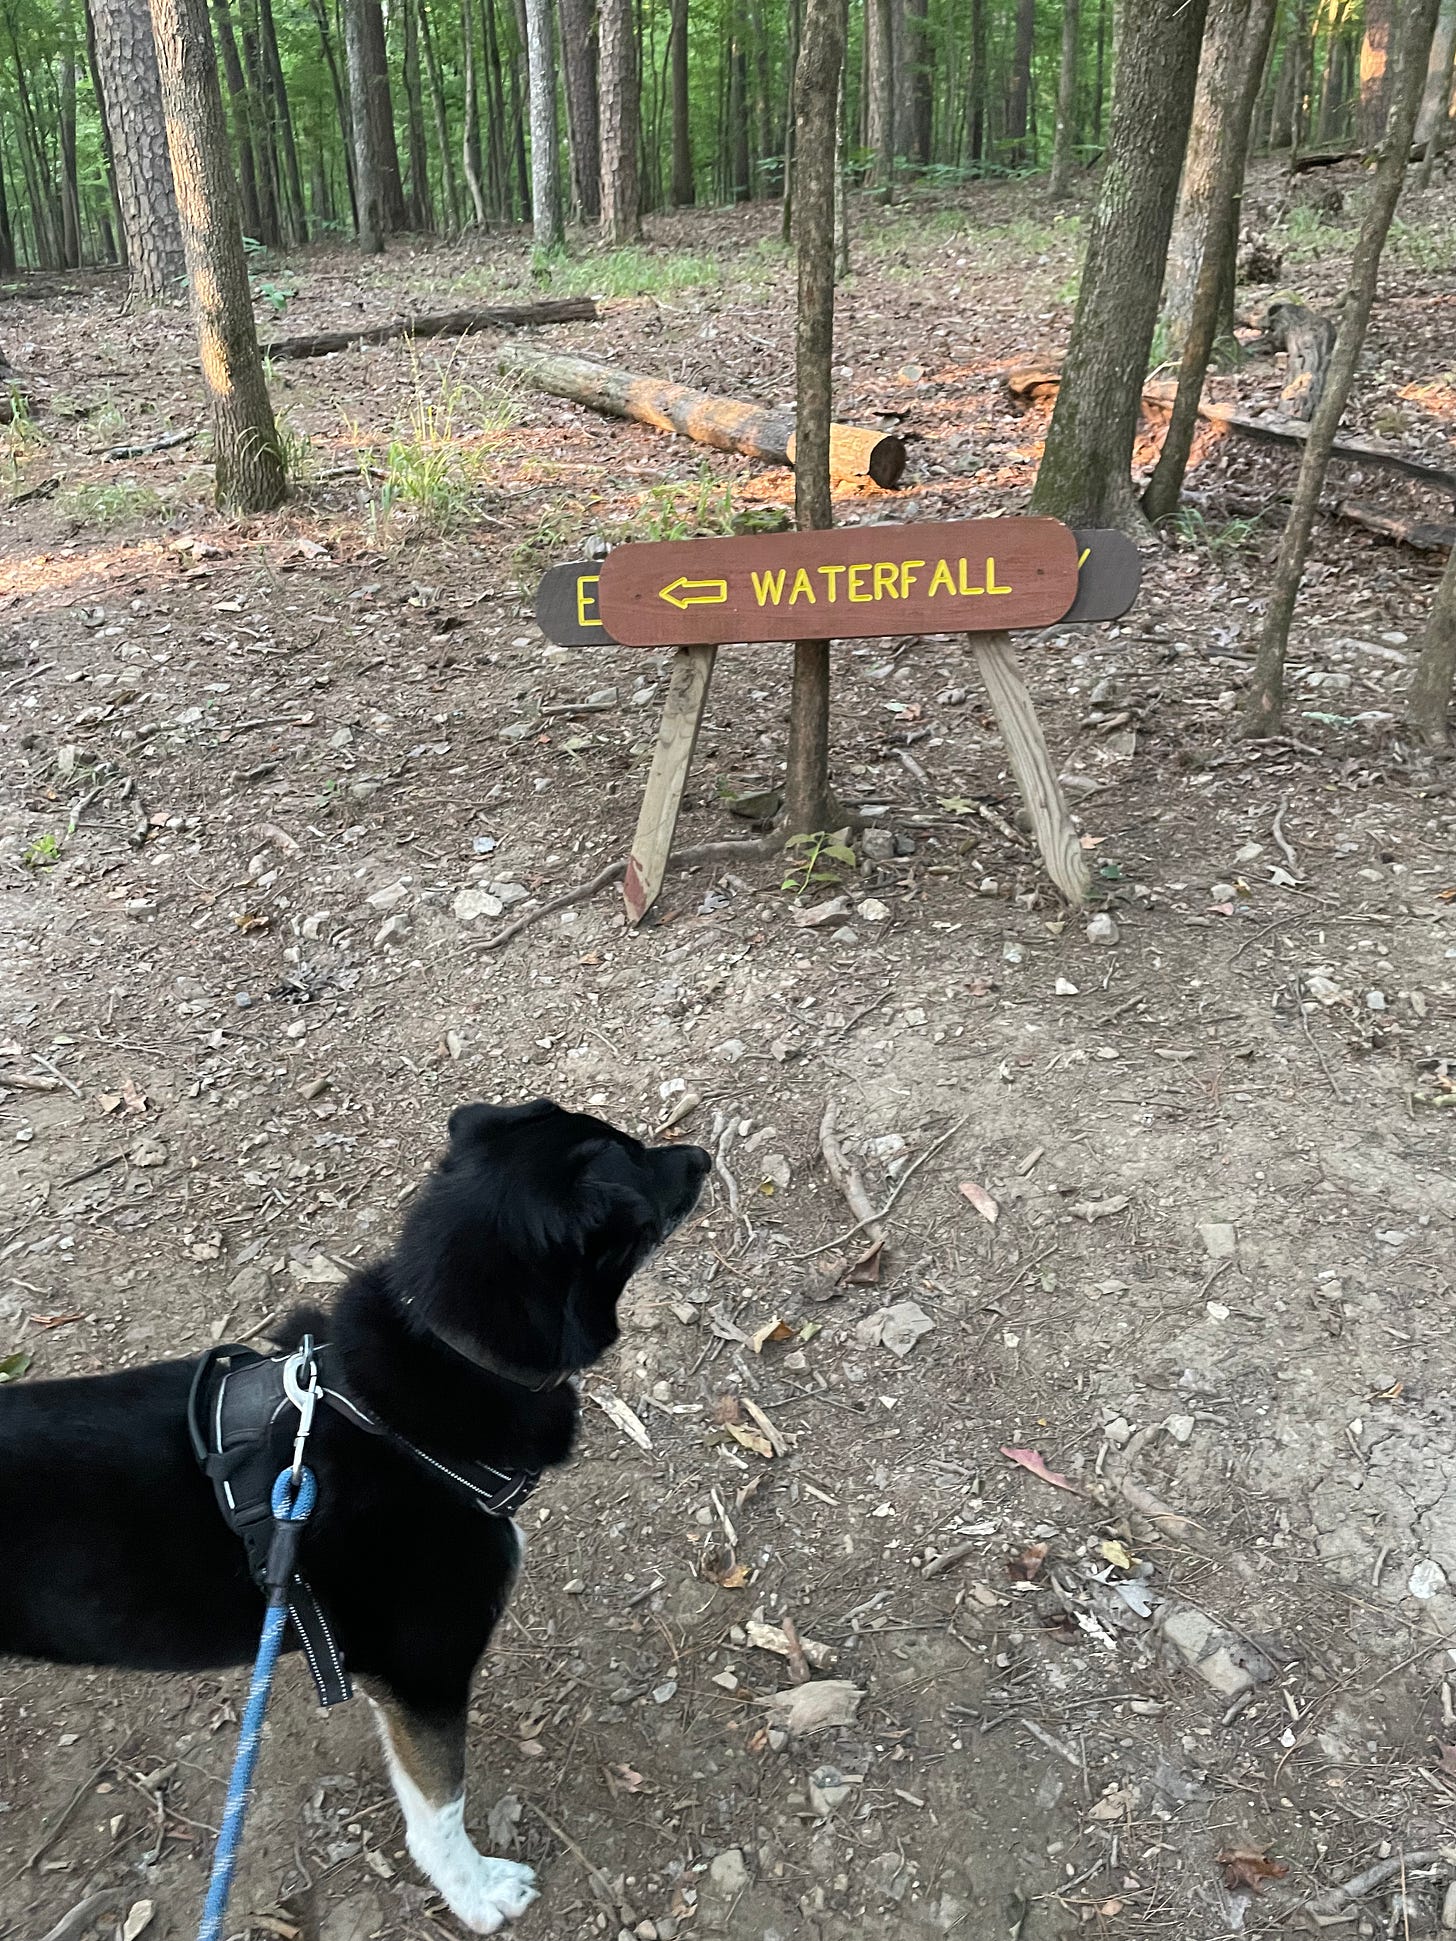 Black dog on a blue leash on a dirt road trail in the forst stands facing “waterfall” arrow sign pointing left. 